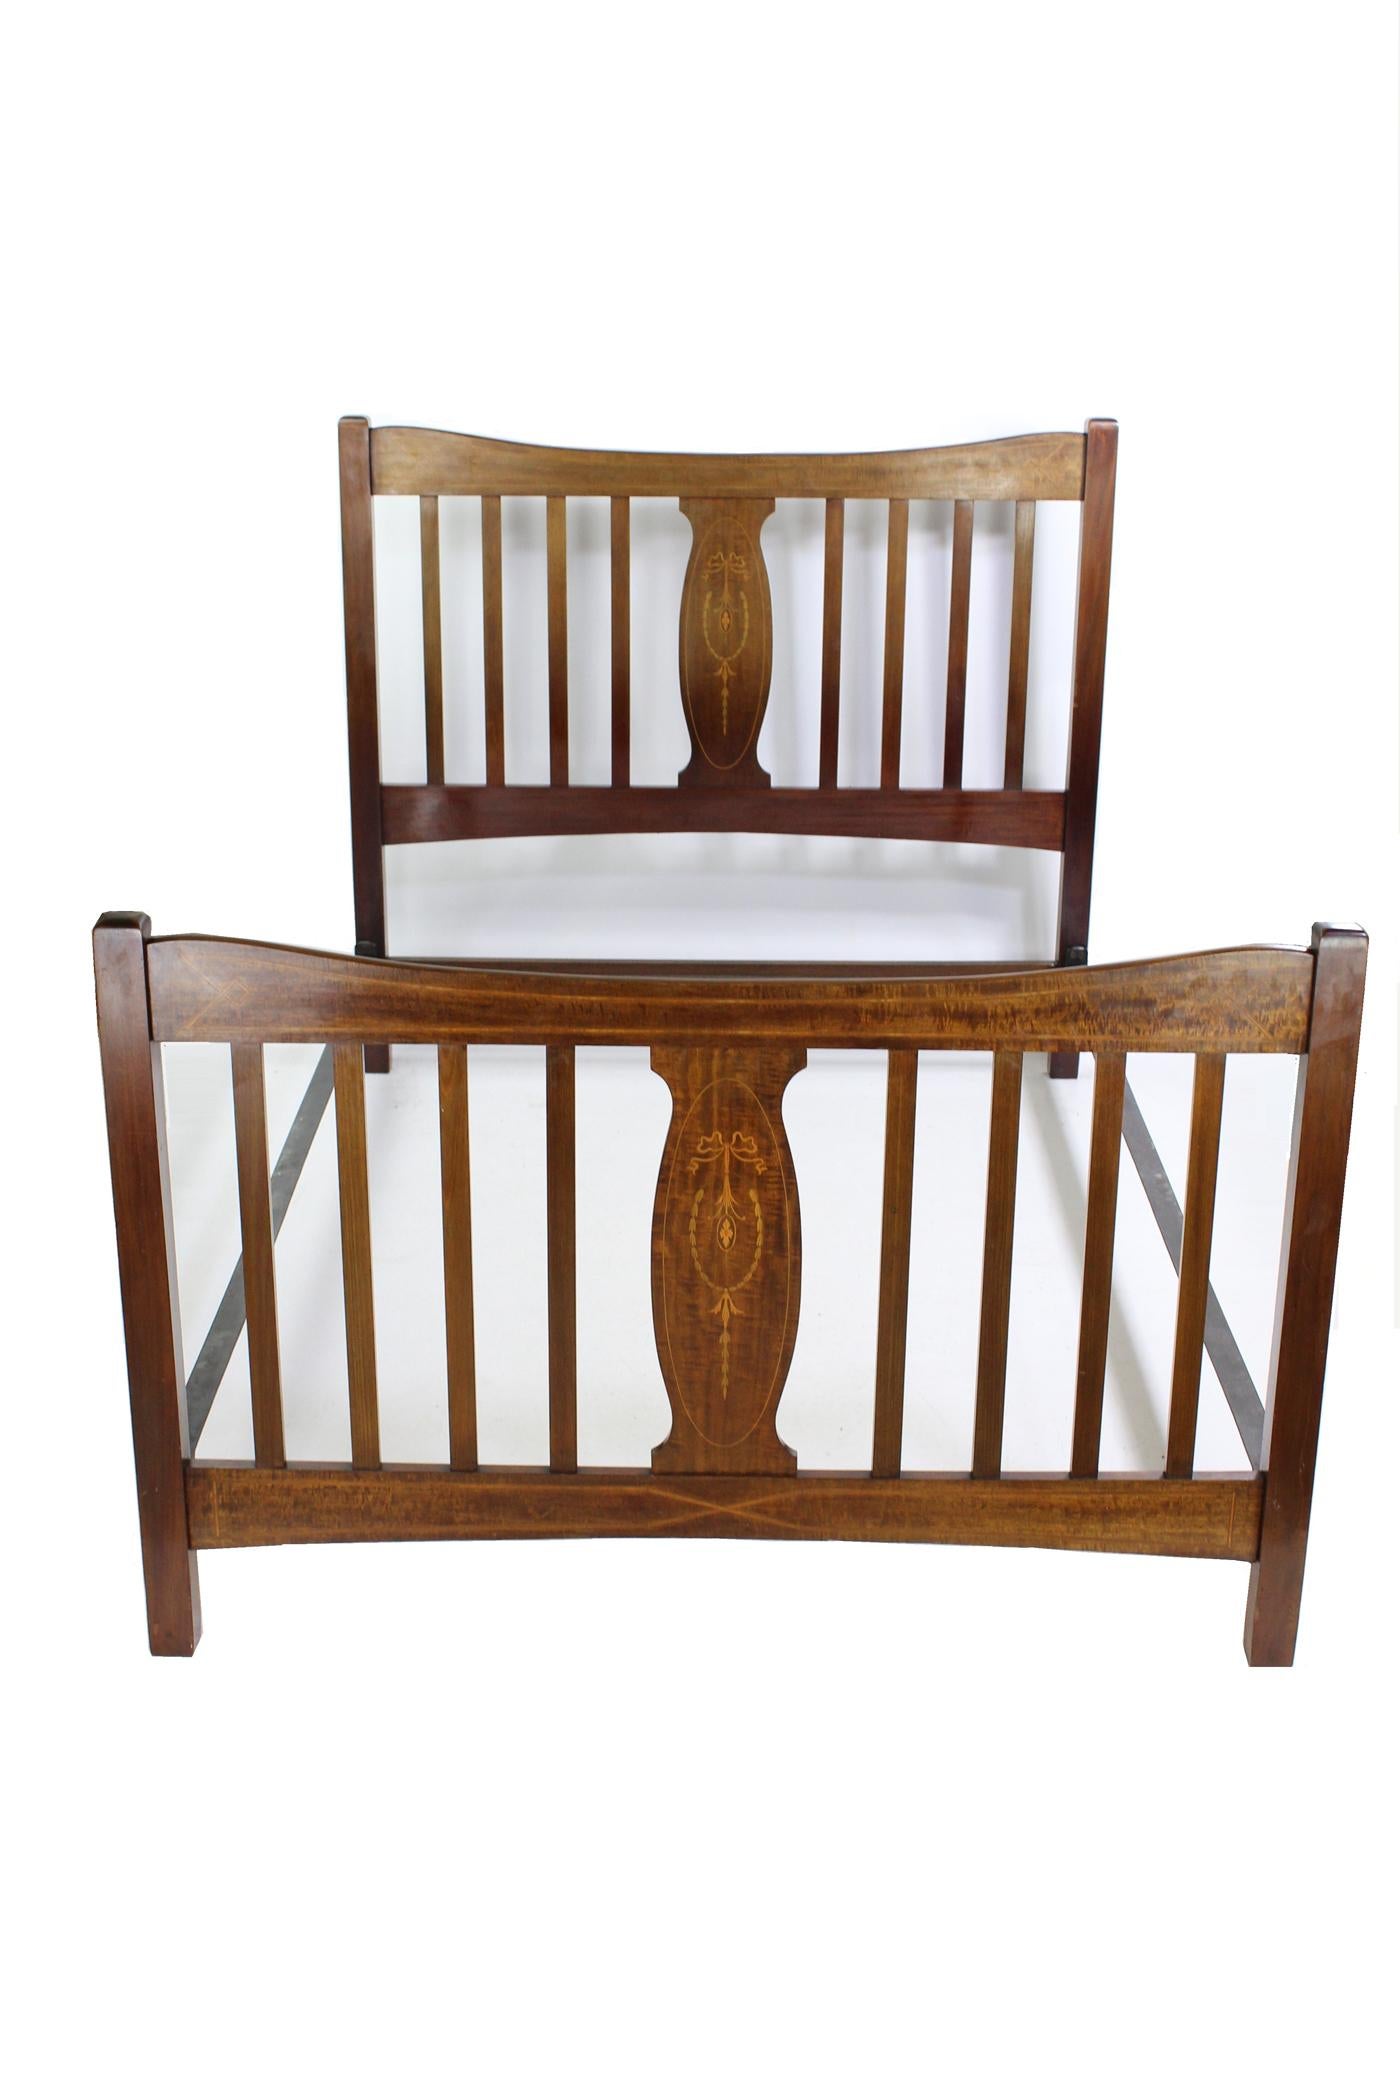 An elegant antique Edwardian mahogany and inlaid double bed dating from circa 1905. In a richly figured mahogany frame, the headboard and footboard inlaid with satinwood inlay. Featuring an inlaid central vase shaped splat flanked by four vertical